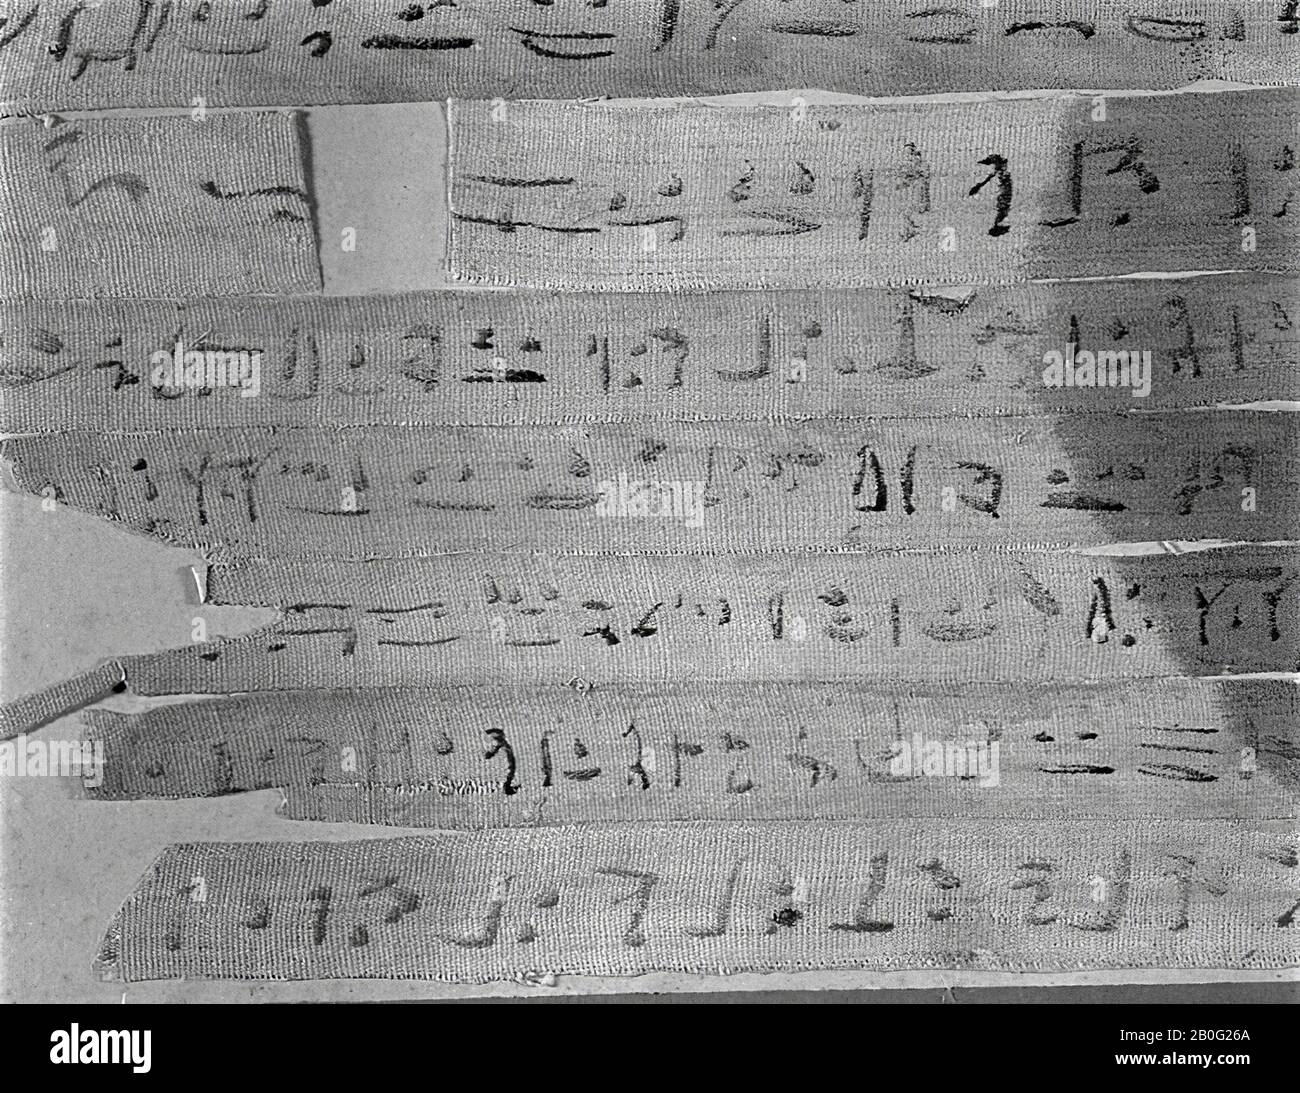 unclear, Djedhor, 1 strip, demotic, A) Mode of framing: stuck on a piece of cardboard, covered with plastic. Assembled together with AL 51 sheet 6, B) Layout, 1. number of columns or lines of text: 1 mummy wrap, 2. type of writing: demotic, 3. ink color: black, no rubrum, 4. reading direction: right to left, 5. number and place of the vignettes: no vignette, 6. color vignettes: n / a, C) Description Stock Photo